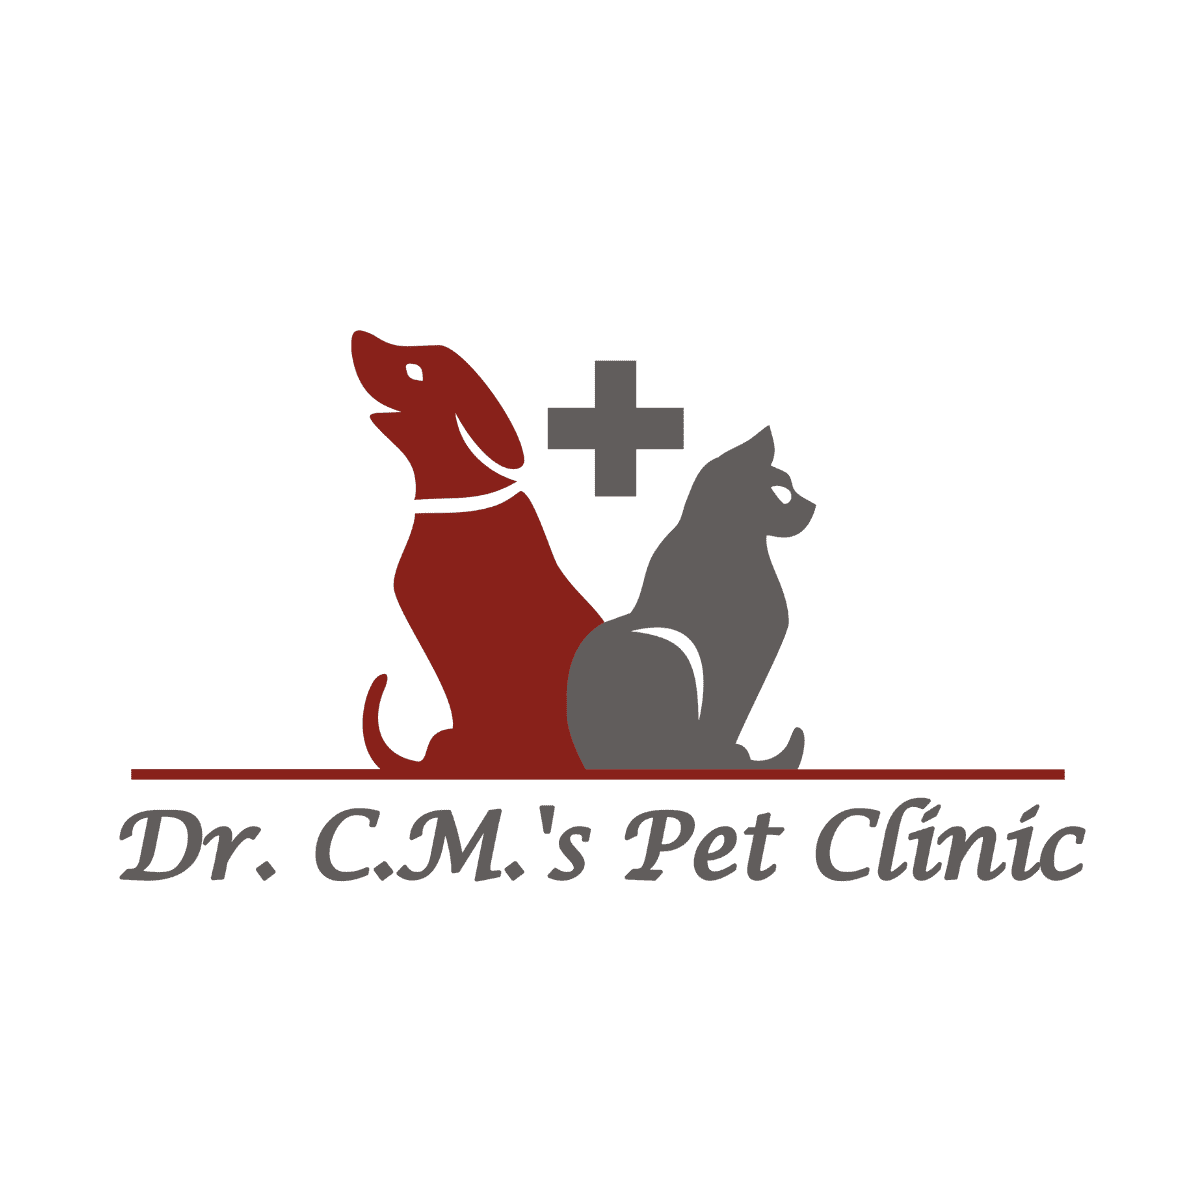 Dr. C.M.’s Pet Clinic – Your Top Veterinary Doctor Near Me | Veterinary ...